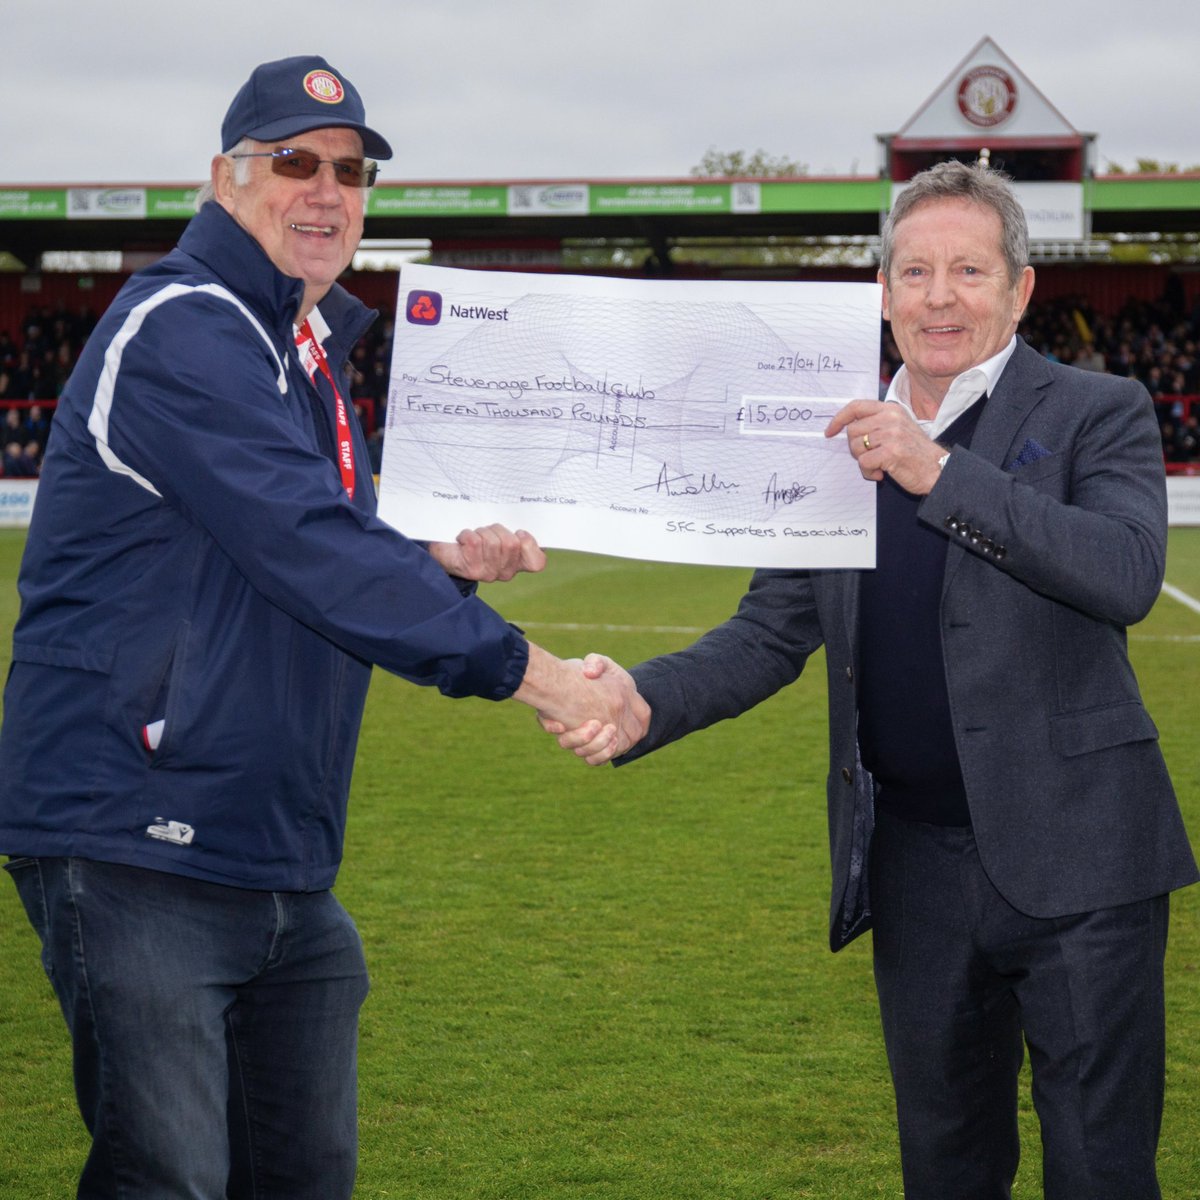 At half-time today, Chairman Phil Wallace was presented with the @_SFC_SA's annual donation to the Club worth £15,000. 👏 Thank you for all of your hard work & support! 🙌